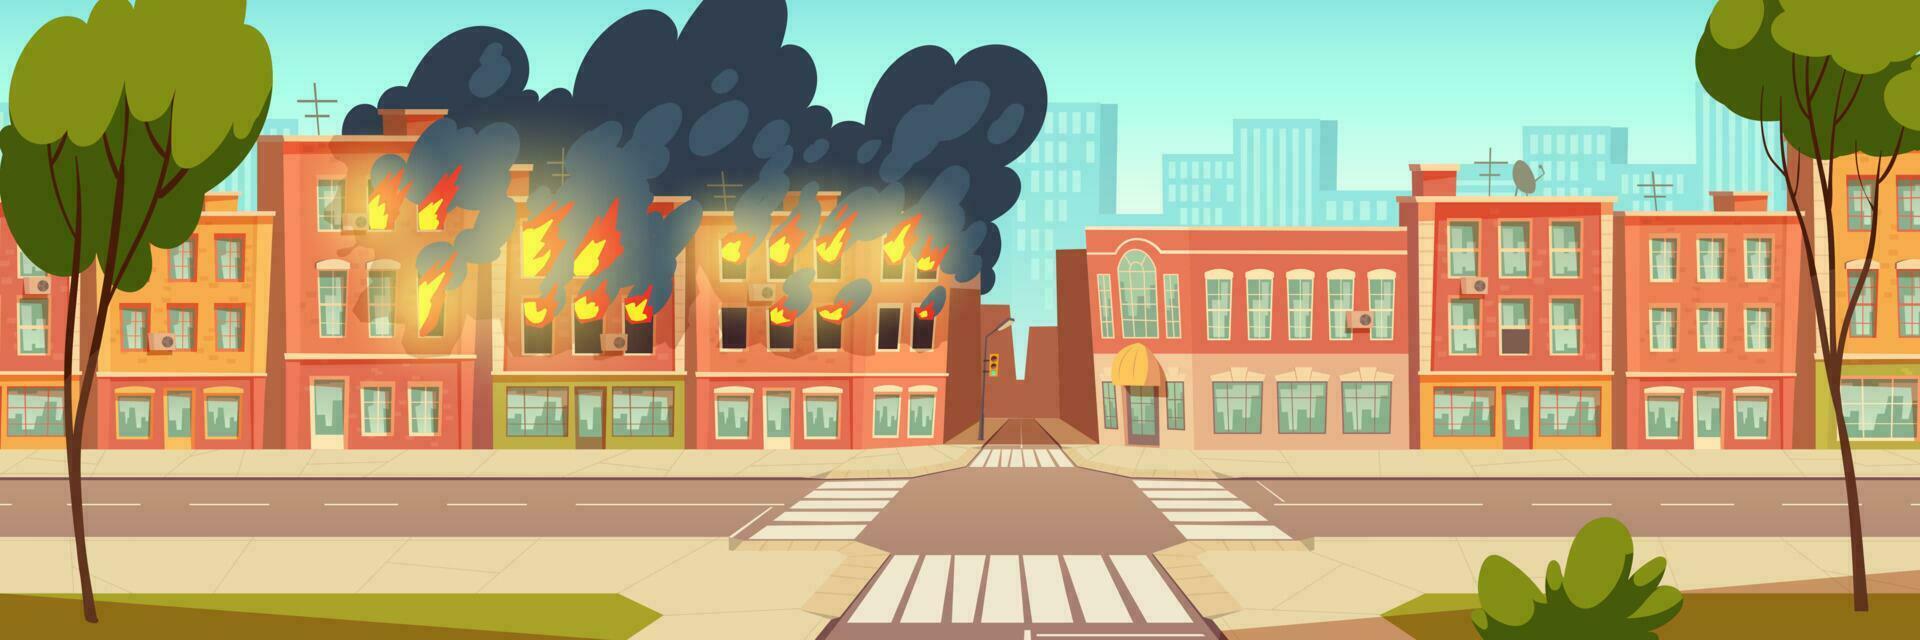 Fire in city house, burning building cartoon vector